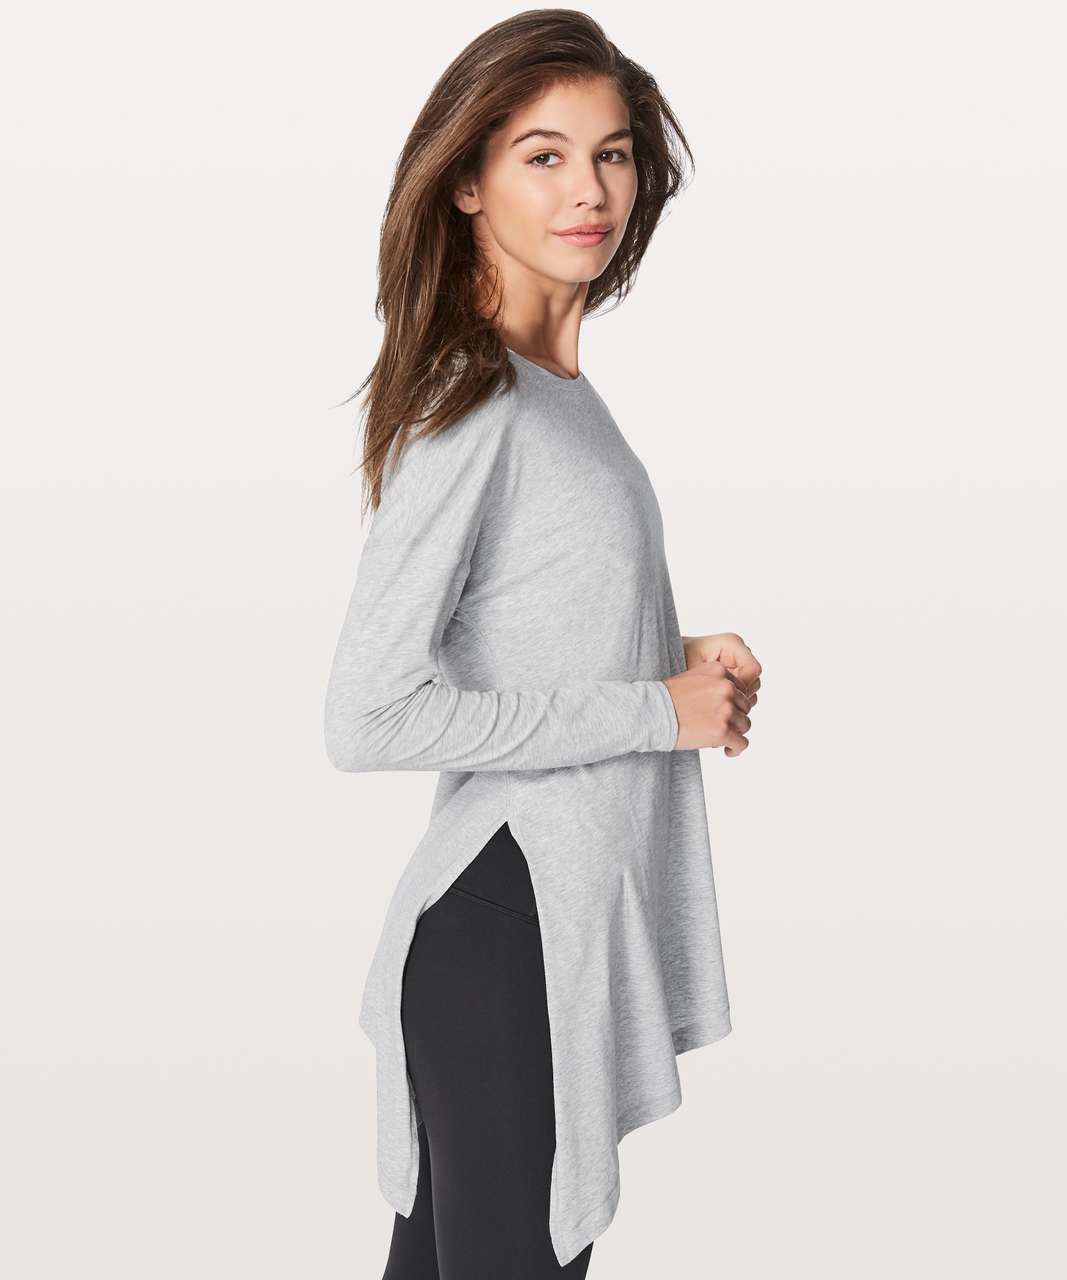 Lululemon EUC to the point long sleeve Size 6 - $43 - From